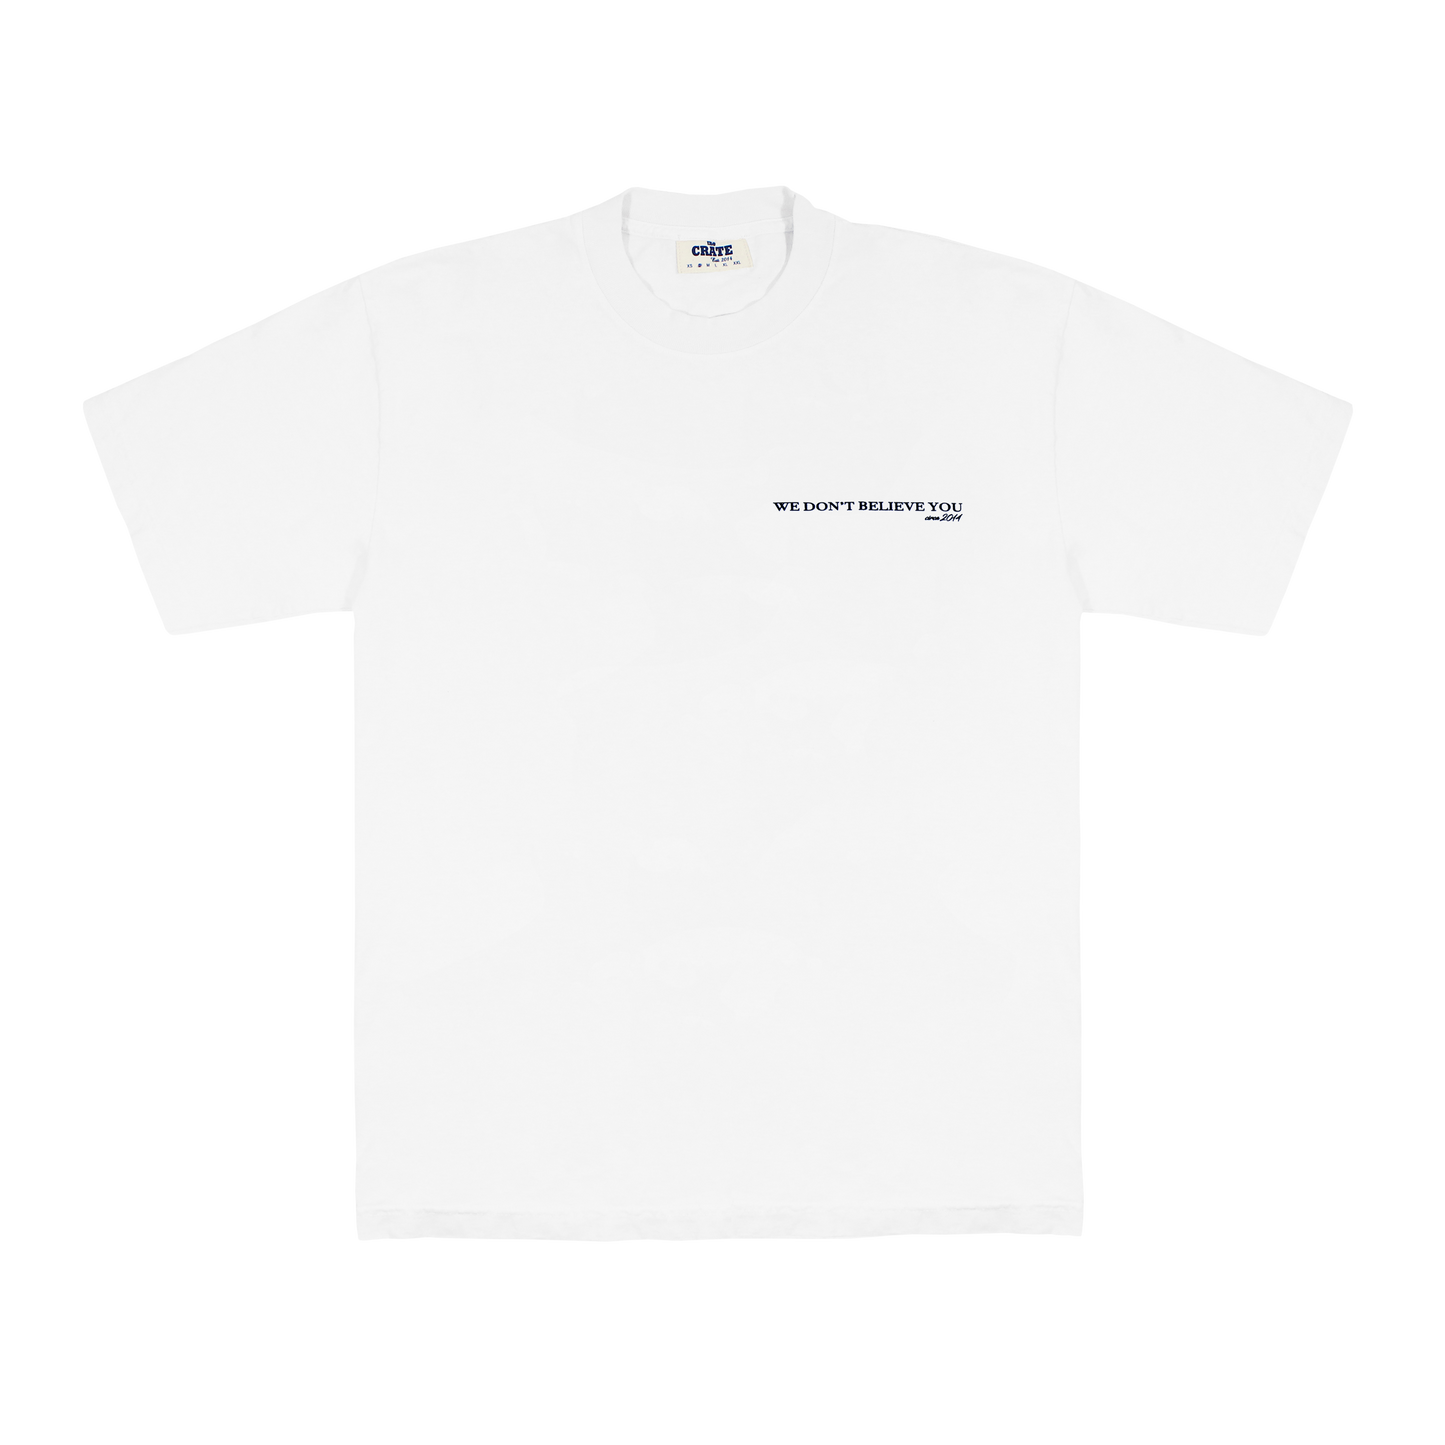 Support T-shirt White